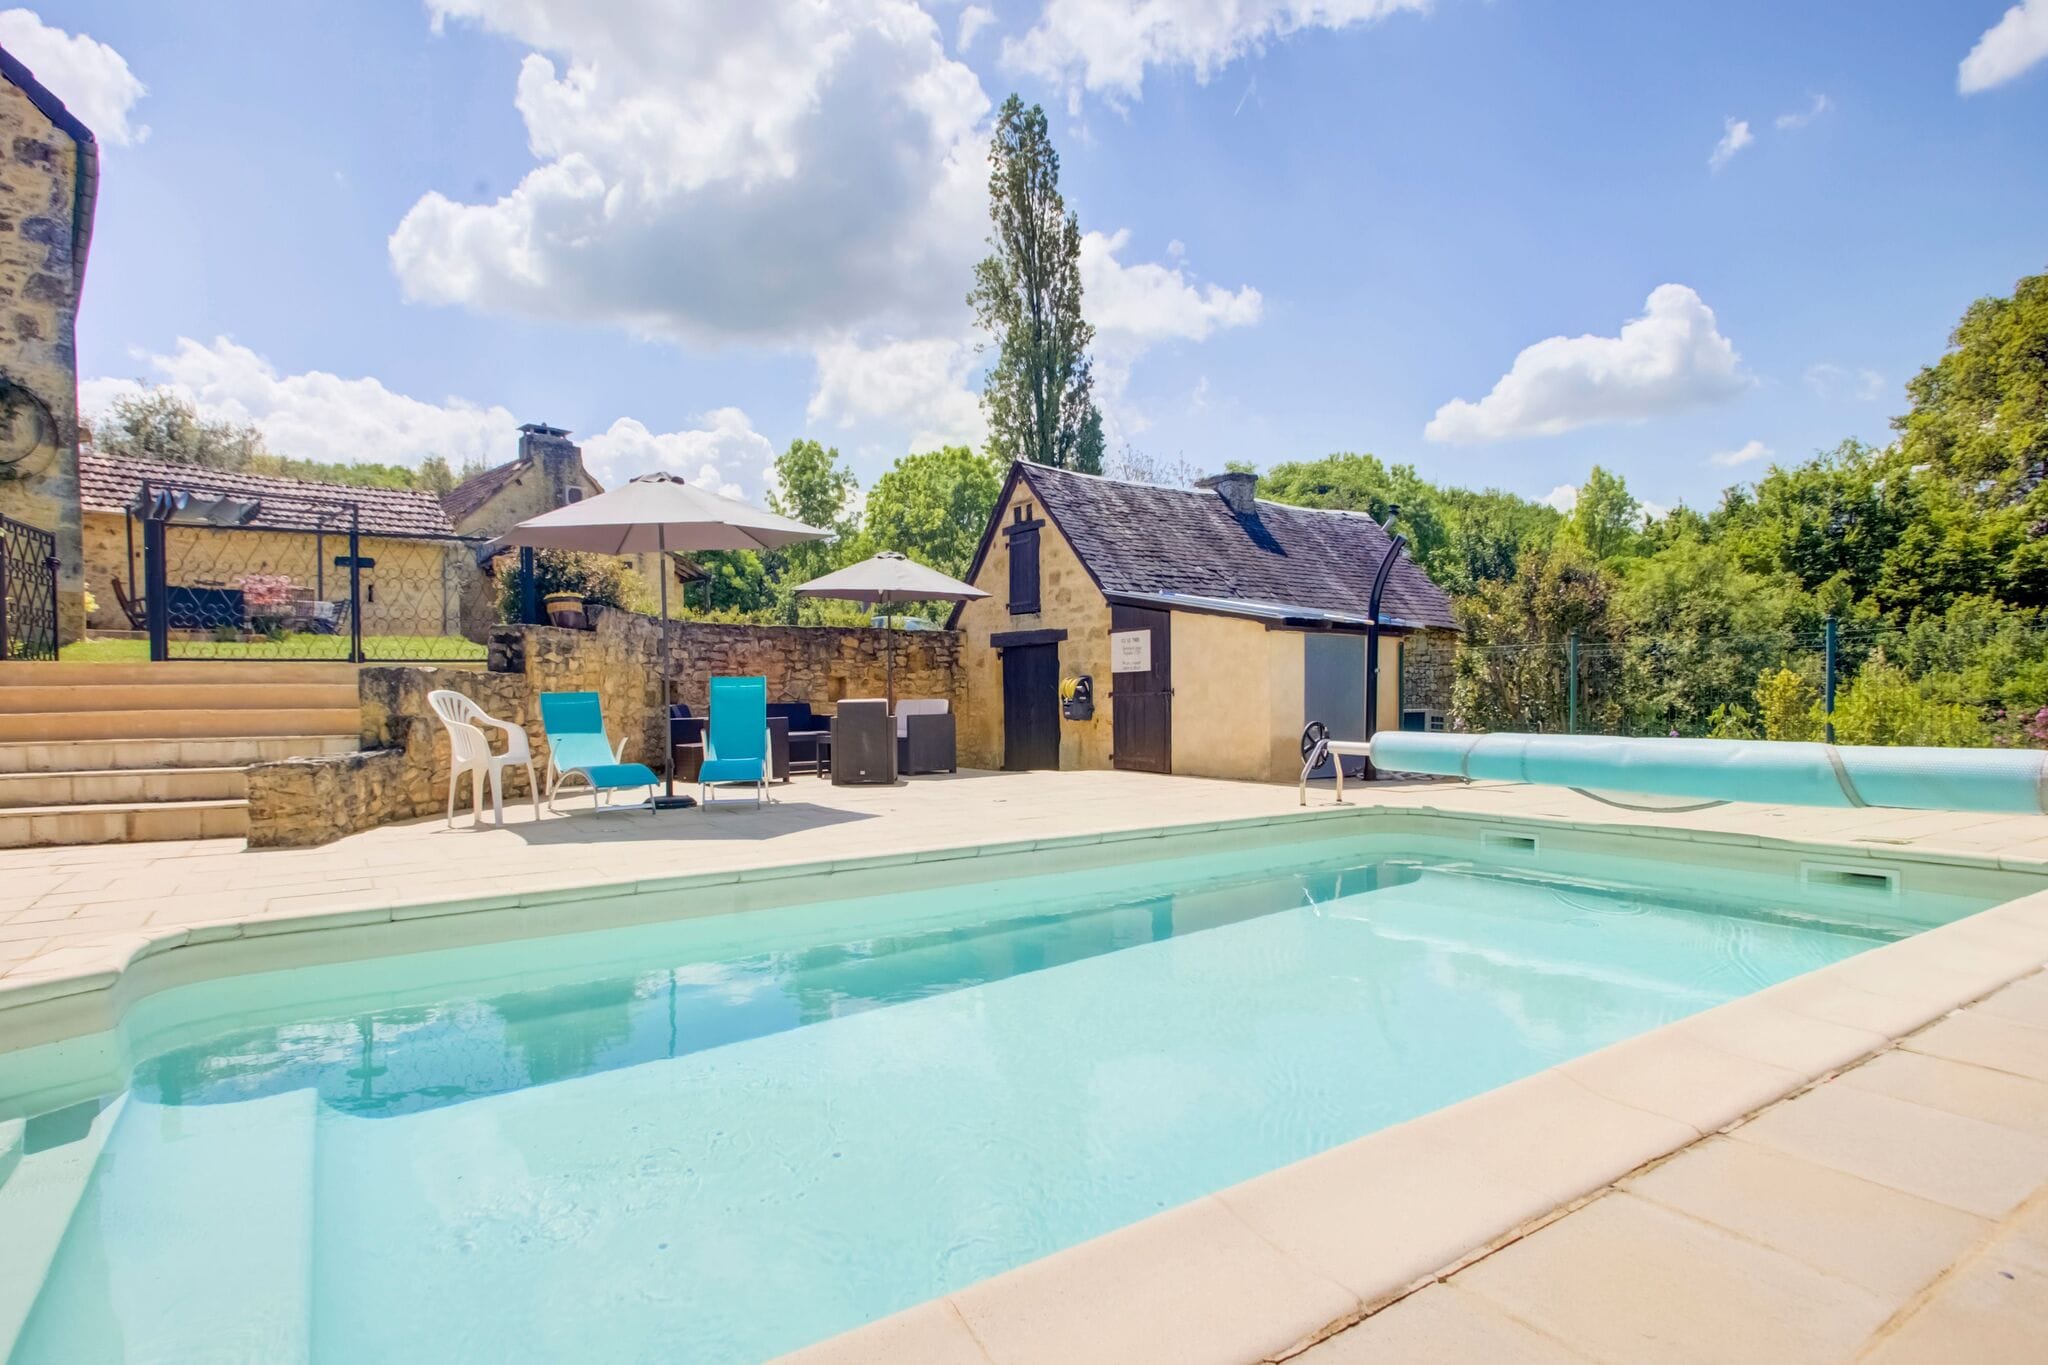 Pleasant Holiday Home with Private Swimming Pool near Sarlat